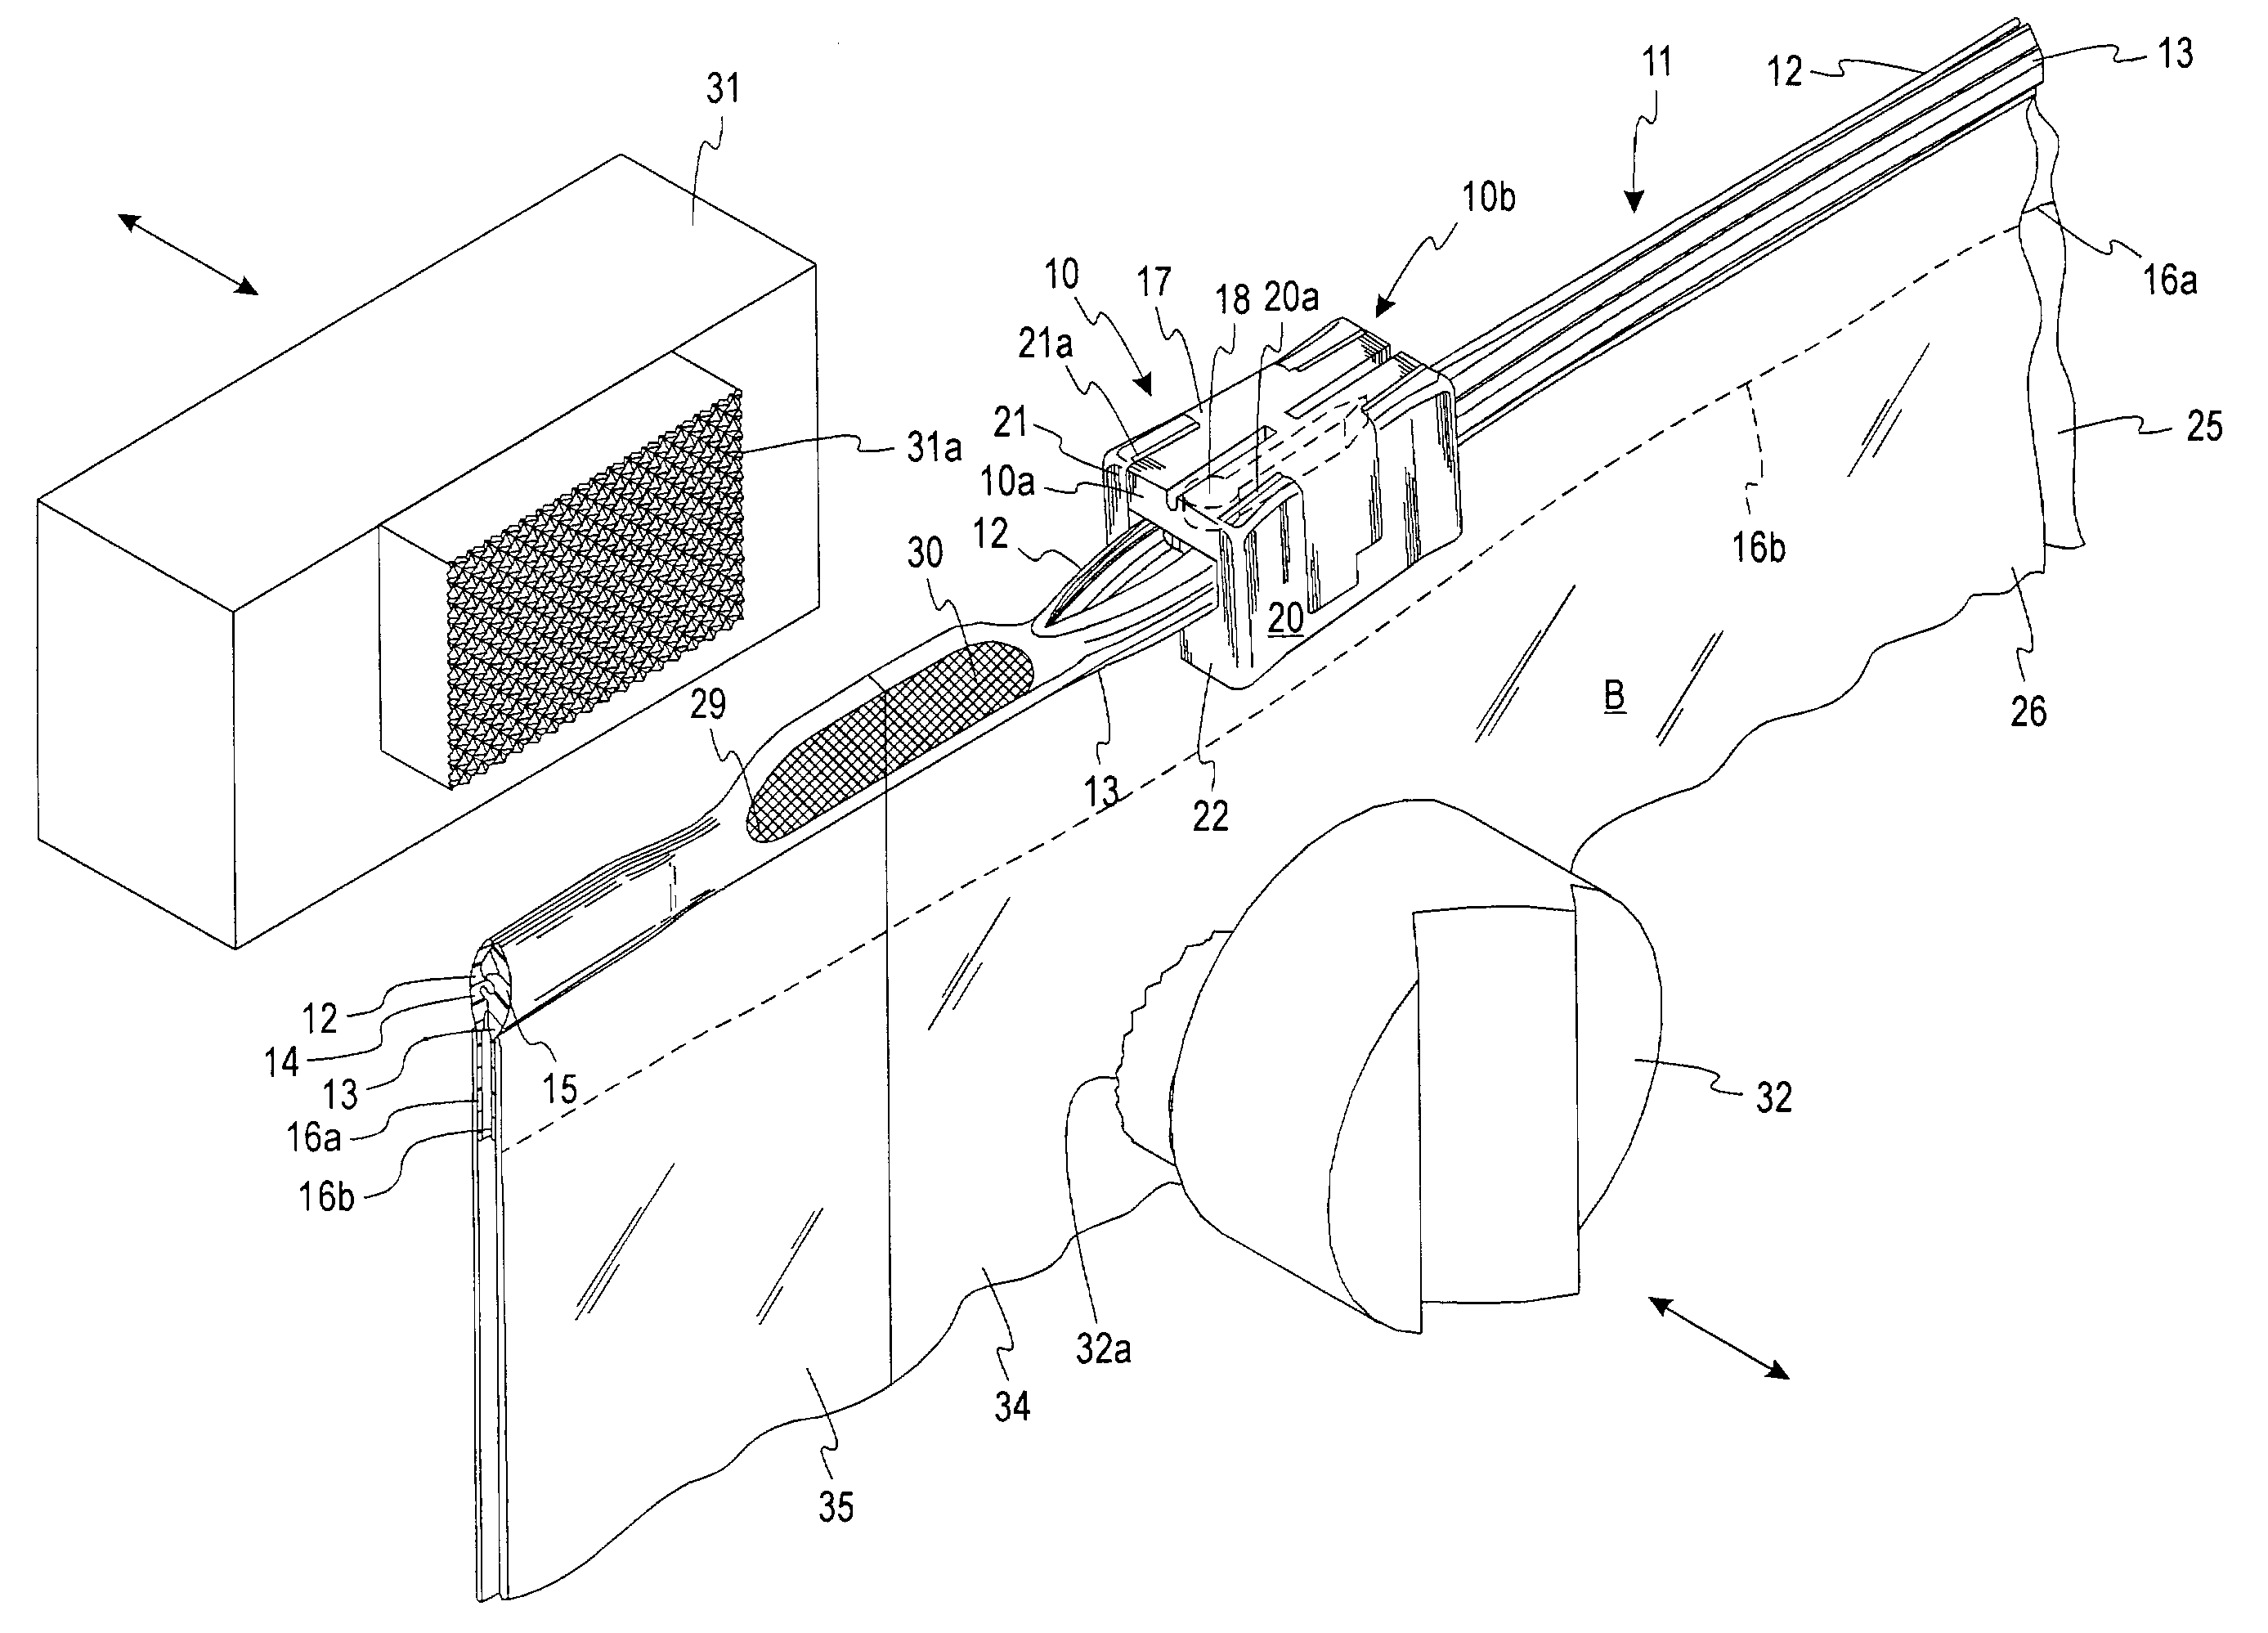 Ultrasonic end stops on zipper closure bags and methods for making same